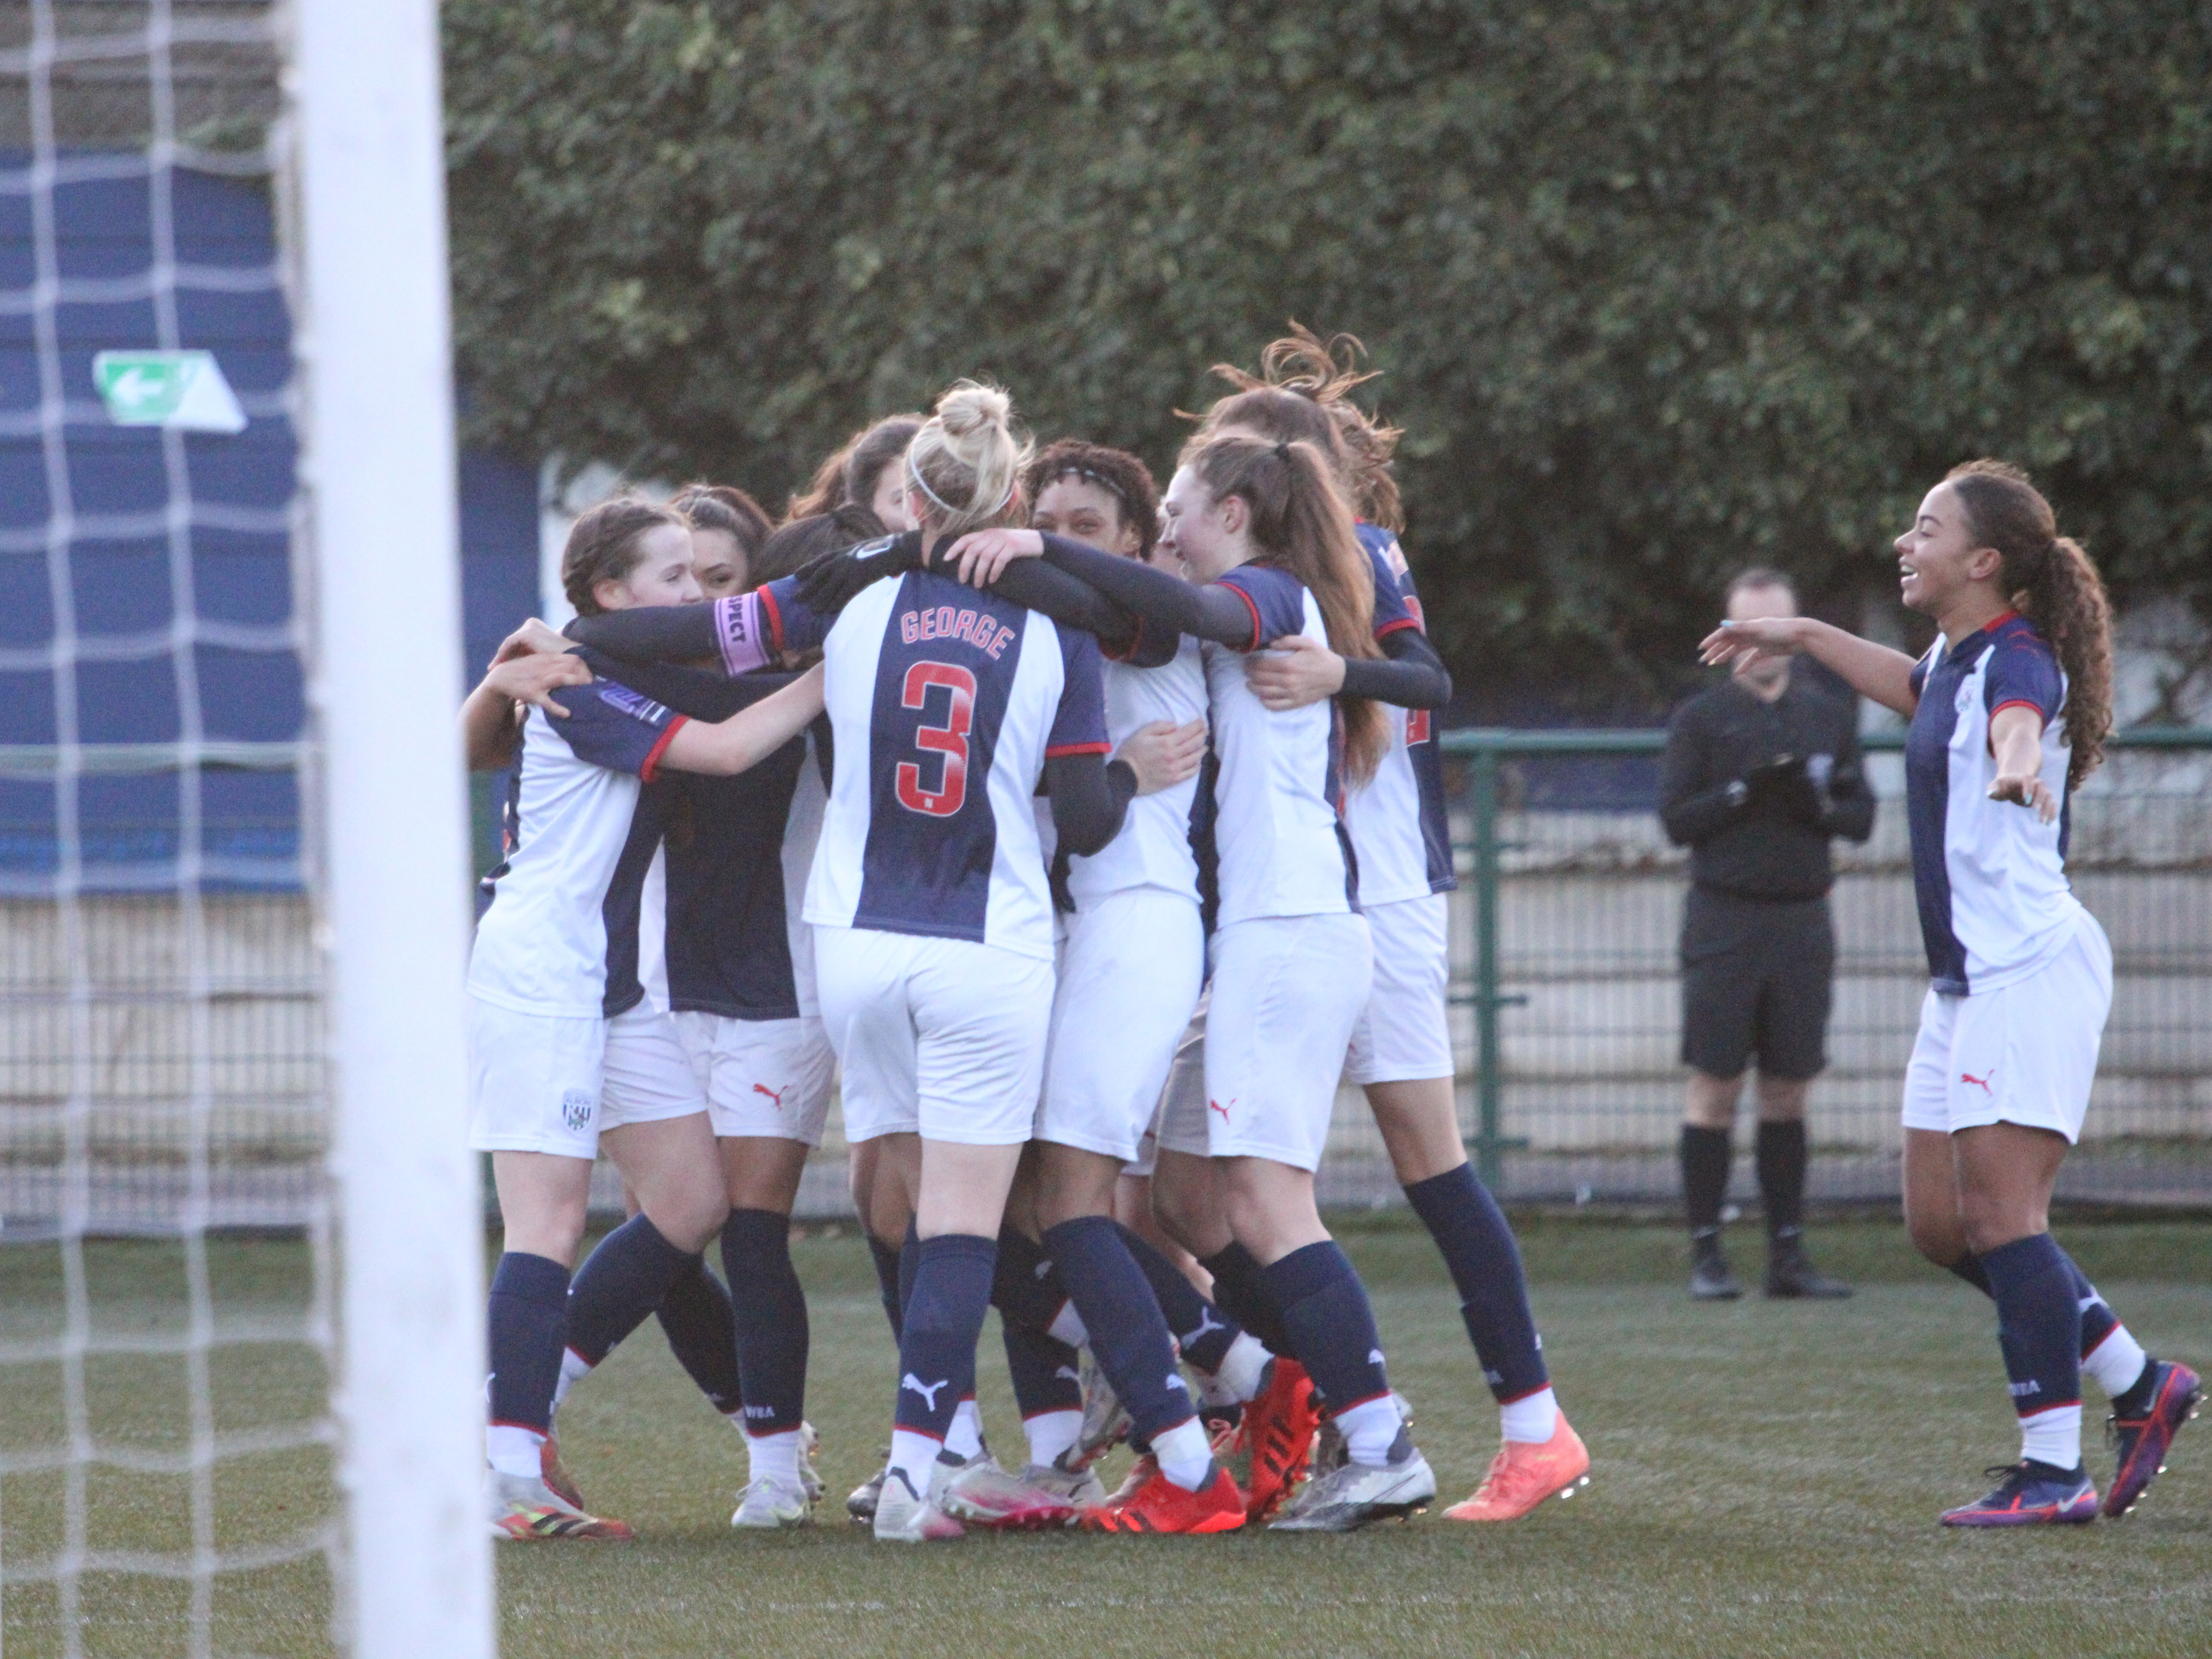 Albion Women kicked-off 2022 by netting a dramatic late goal to beat Stoke City 1-0 at Coles Lane on Sunday